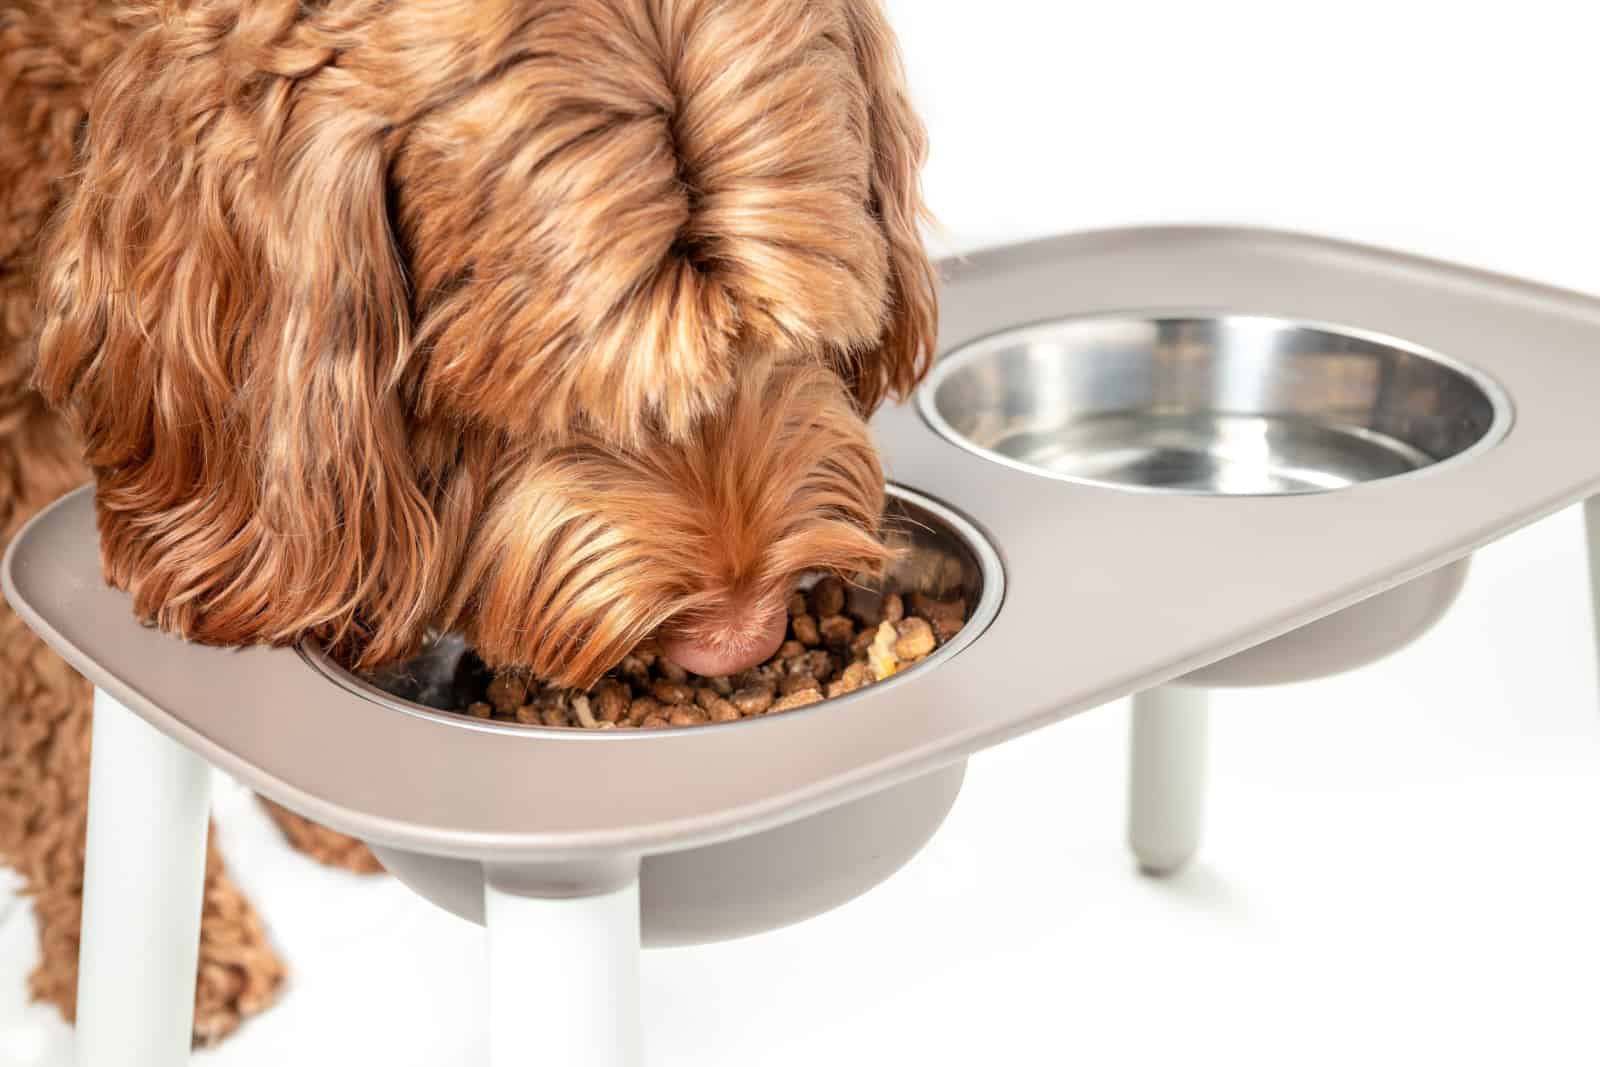 Red labradoodle dog eating from a feeding station